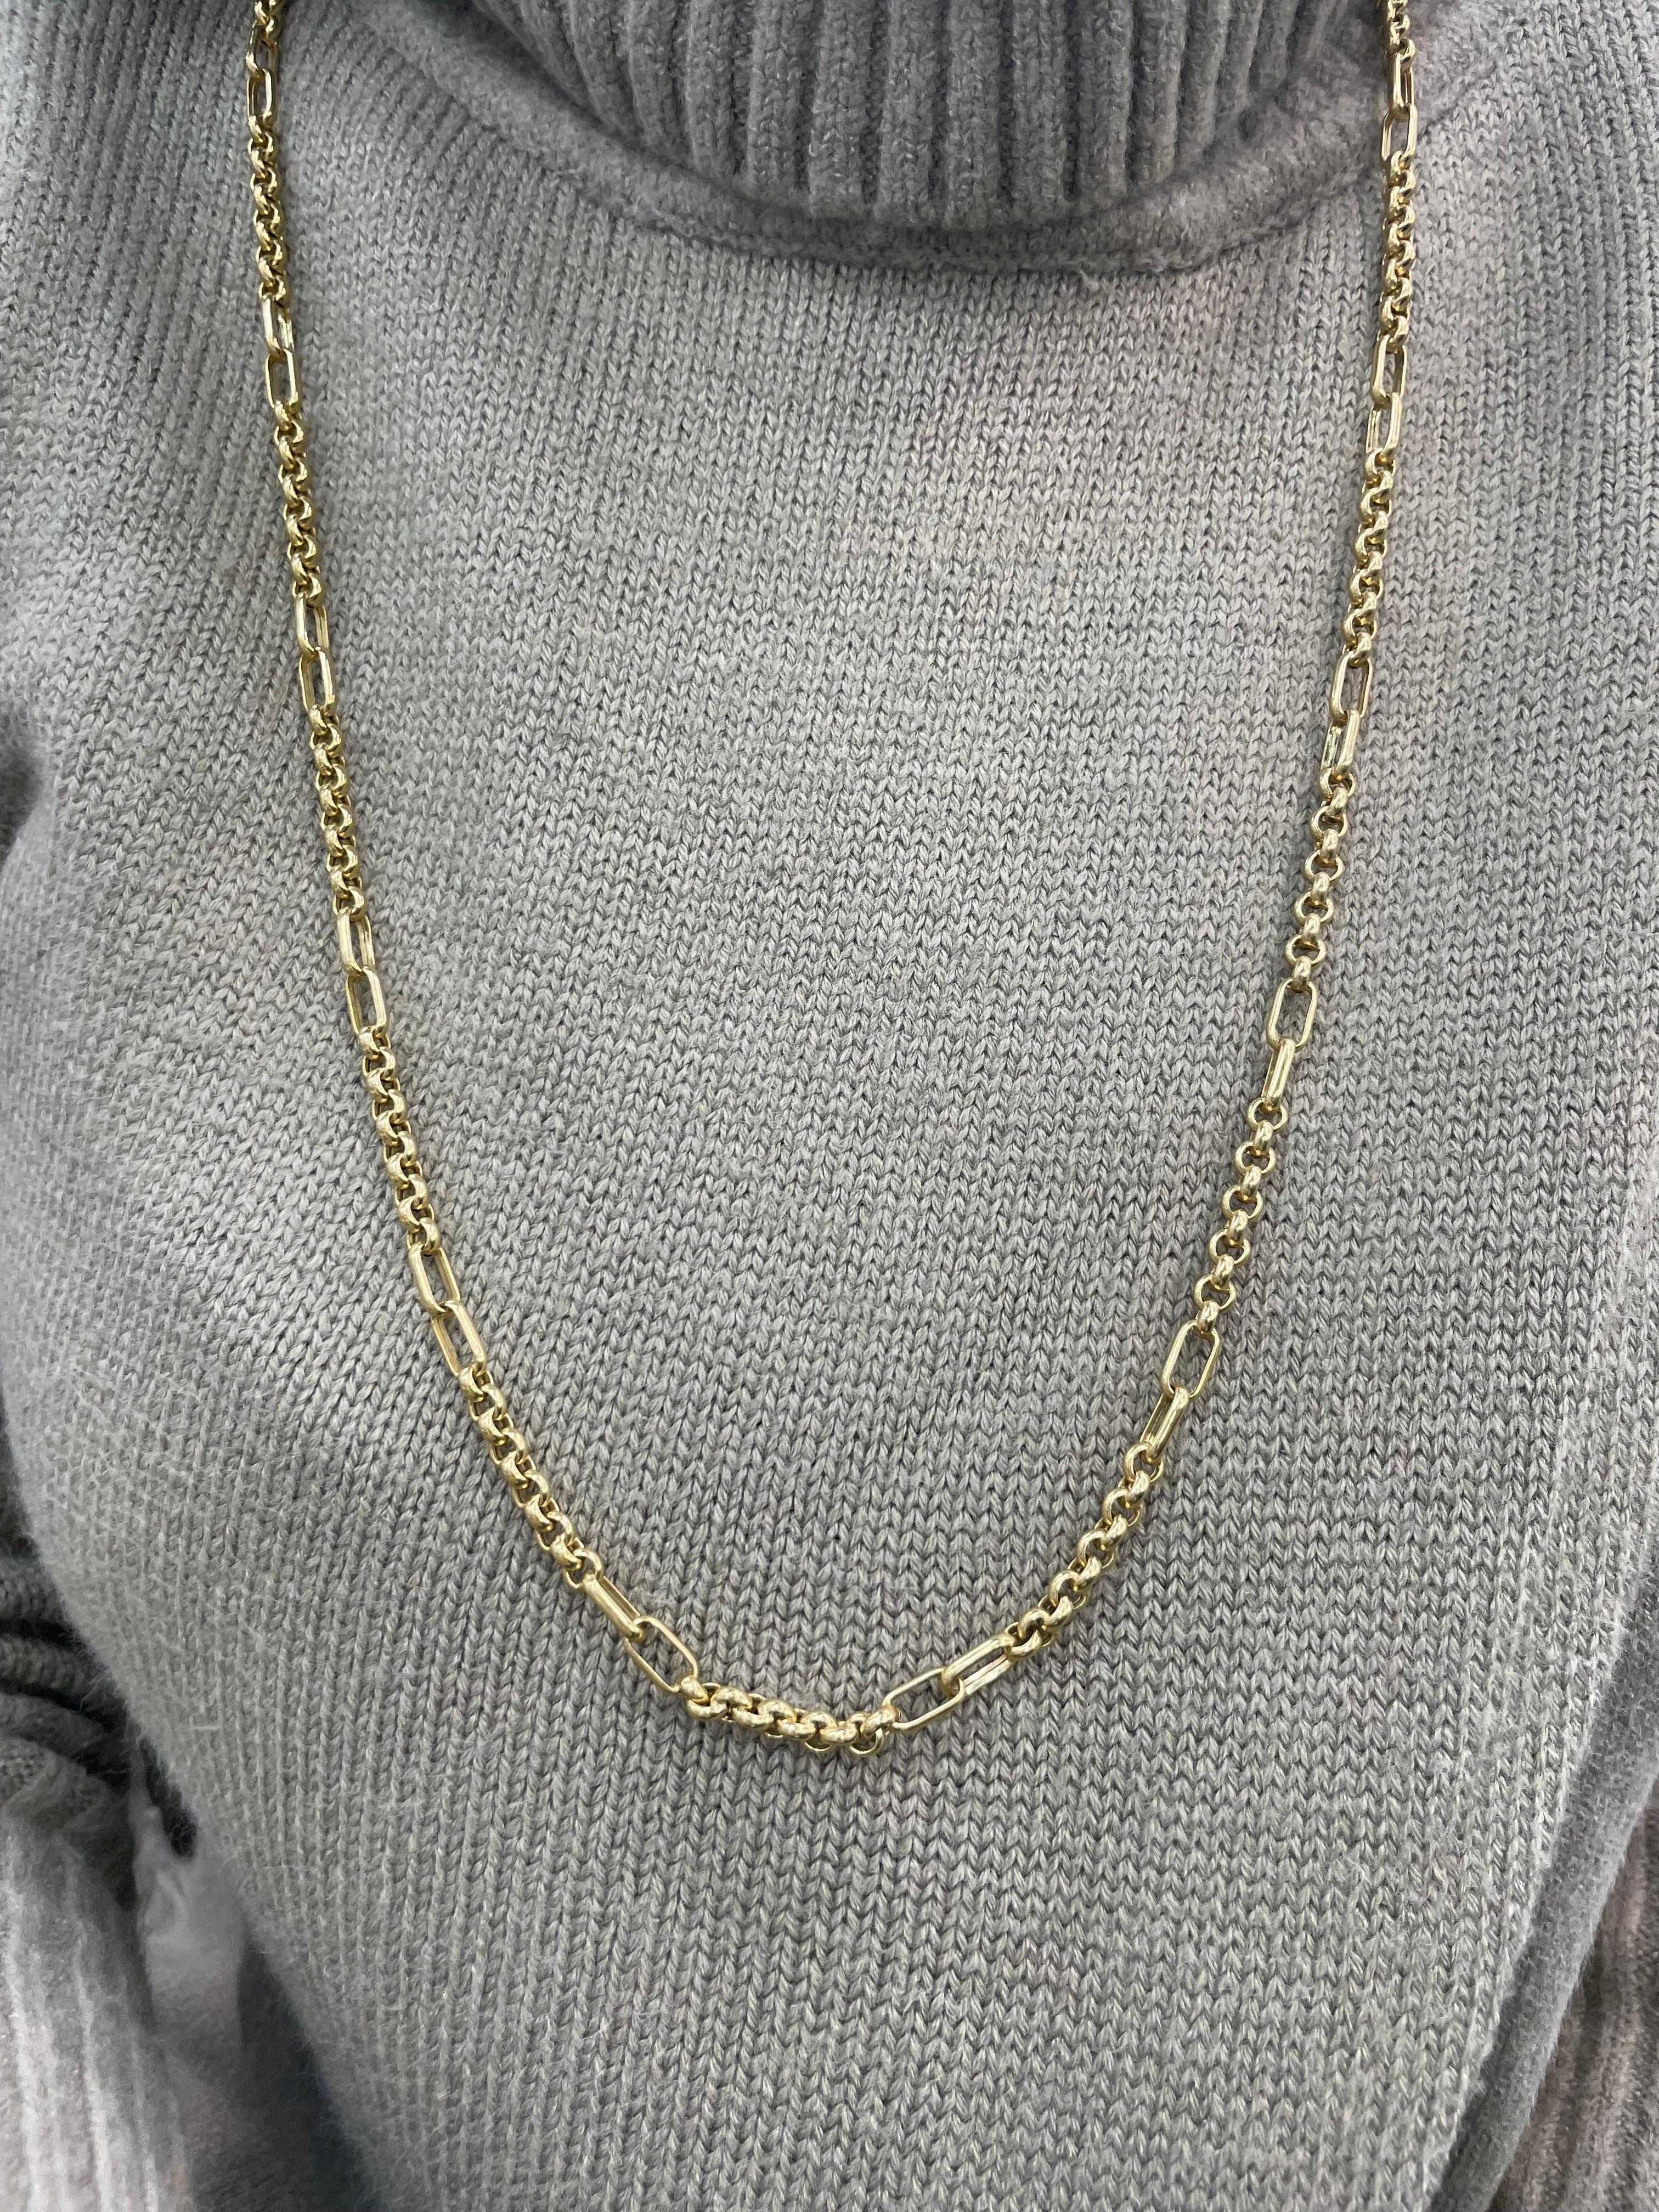 14 Karat Yellow Gold Link Necklace 25.6 Grams 36.5 Inches For Sale 7